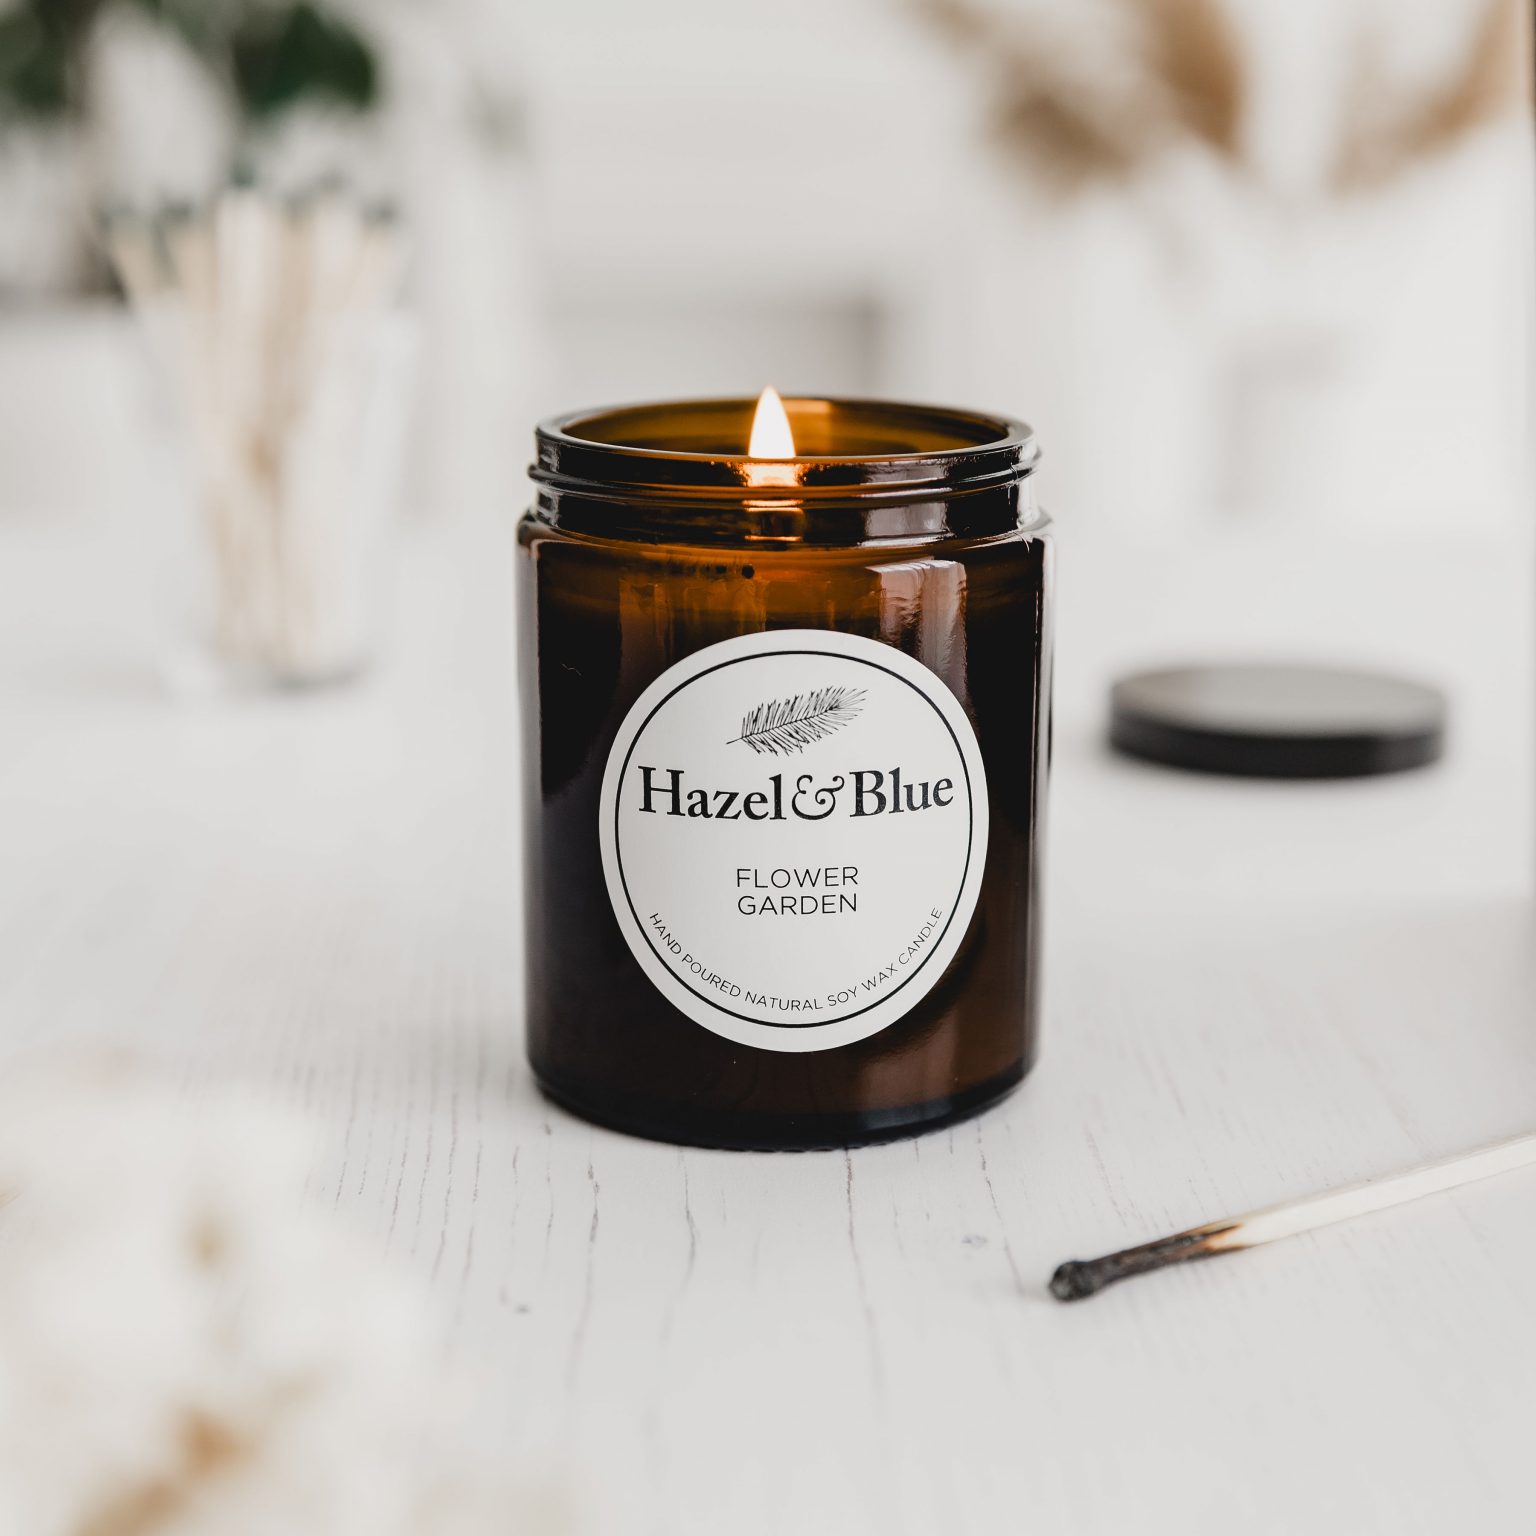 flower garden soy candle floral fresh flower scented soy candle vegan non toxic eco friendly soy candles uk hazel and blue